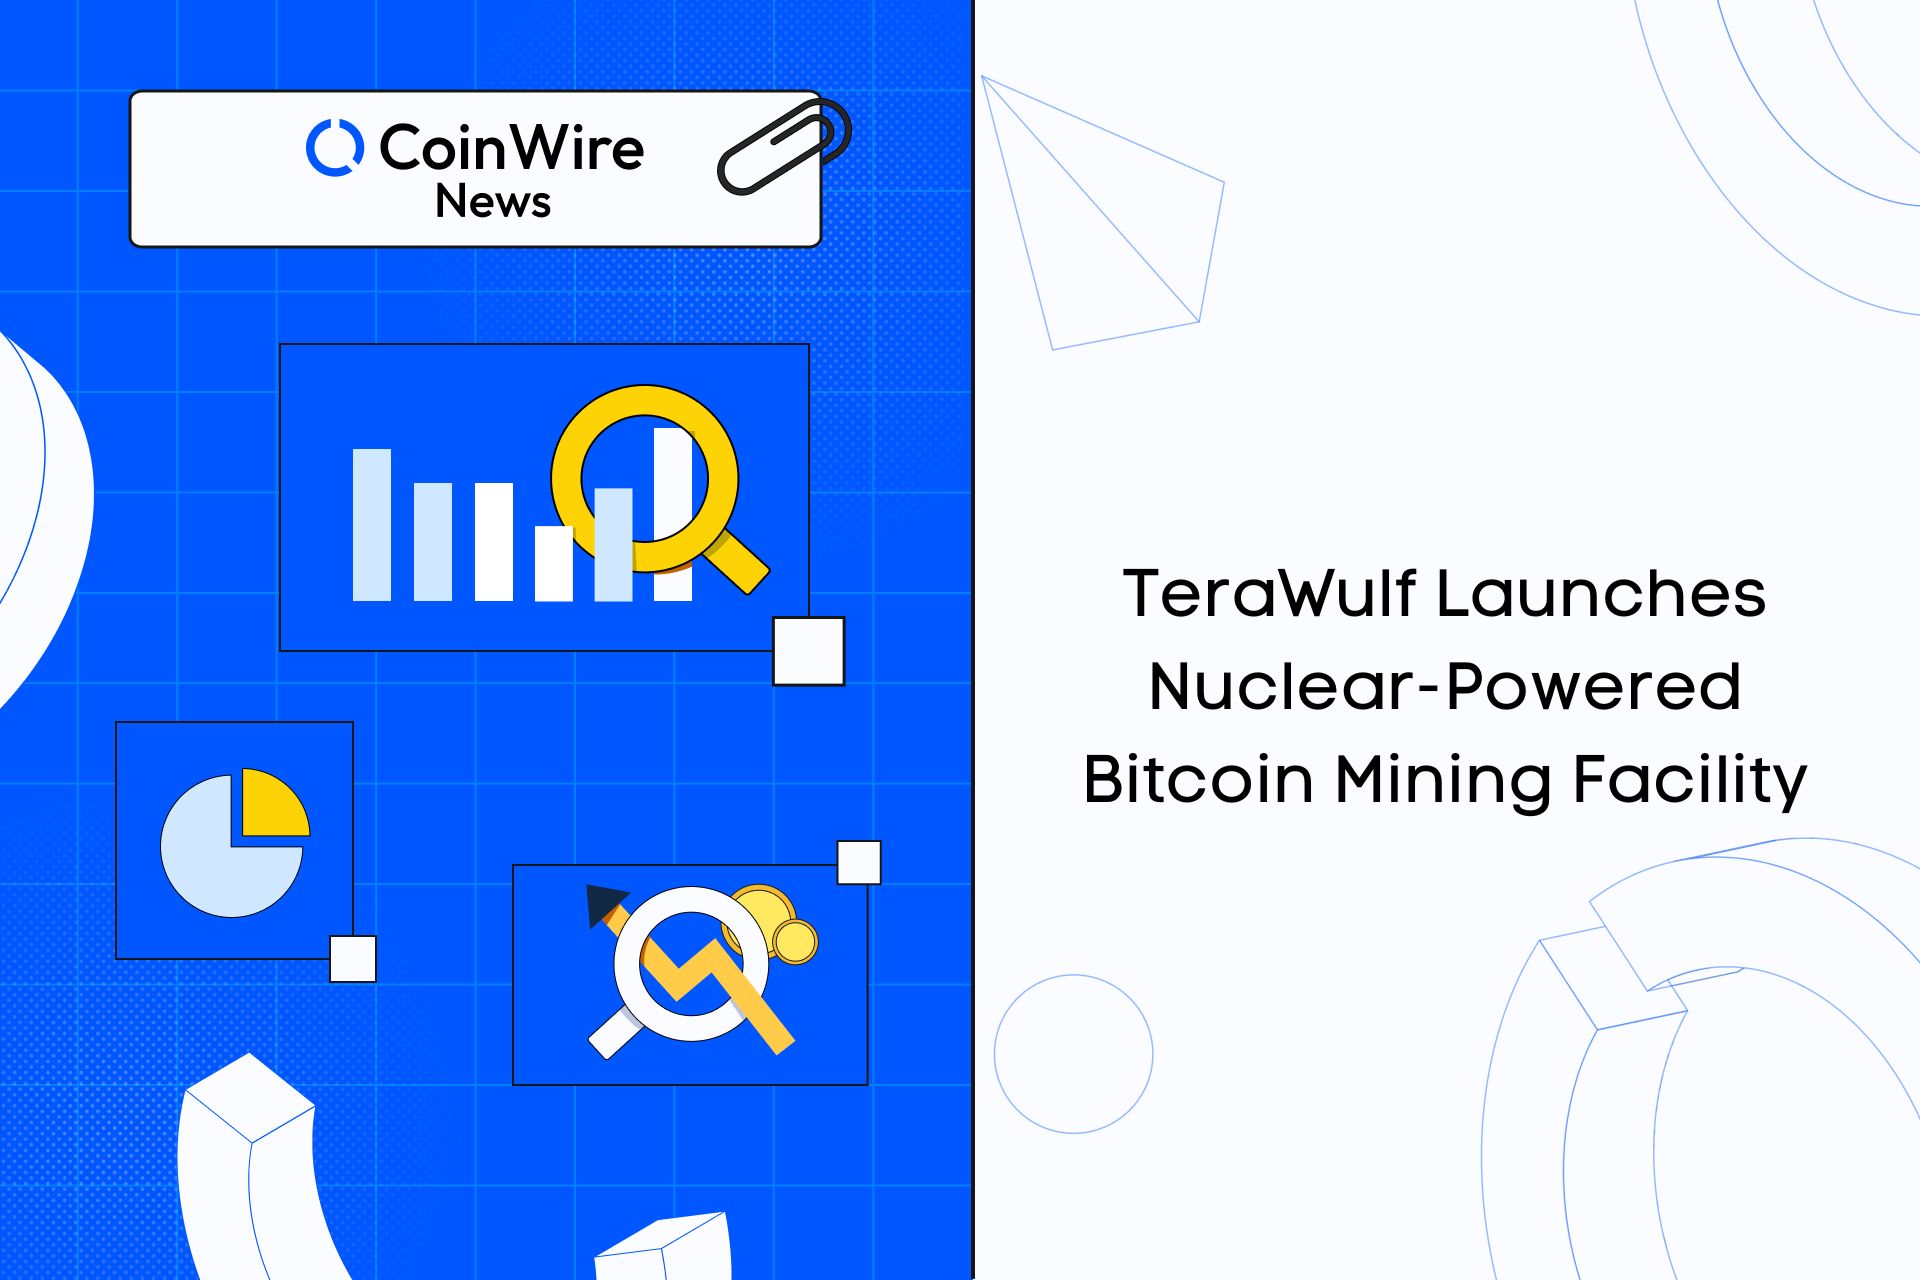 Terawulf Launches Nuclear-Powered Bitcoin Mining Facility